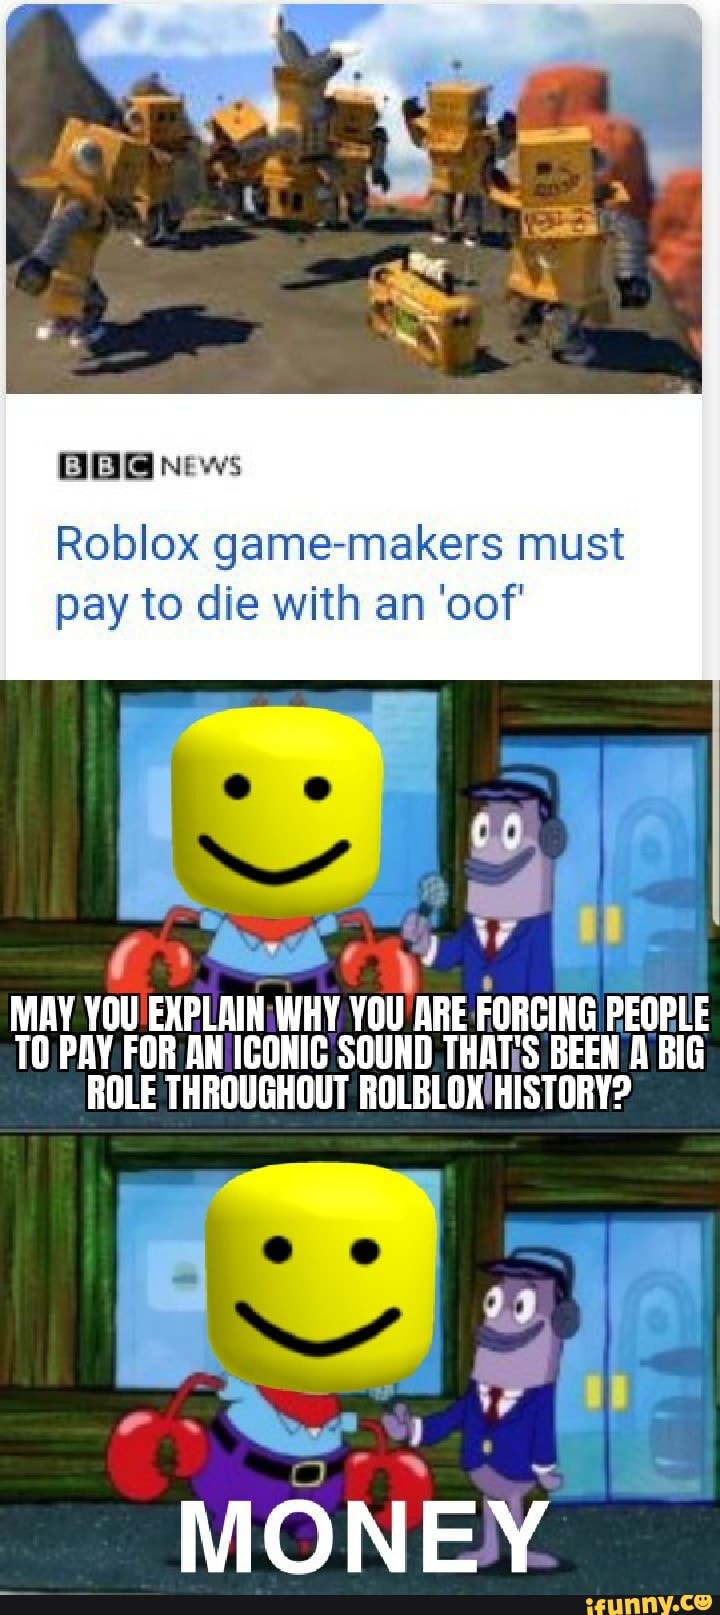 BBC News: Roblox gamers must pay to die with an 'oof' : r/Games